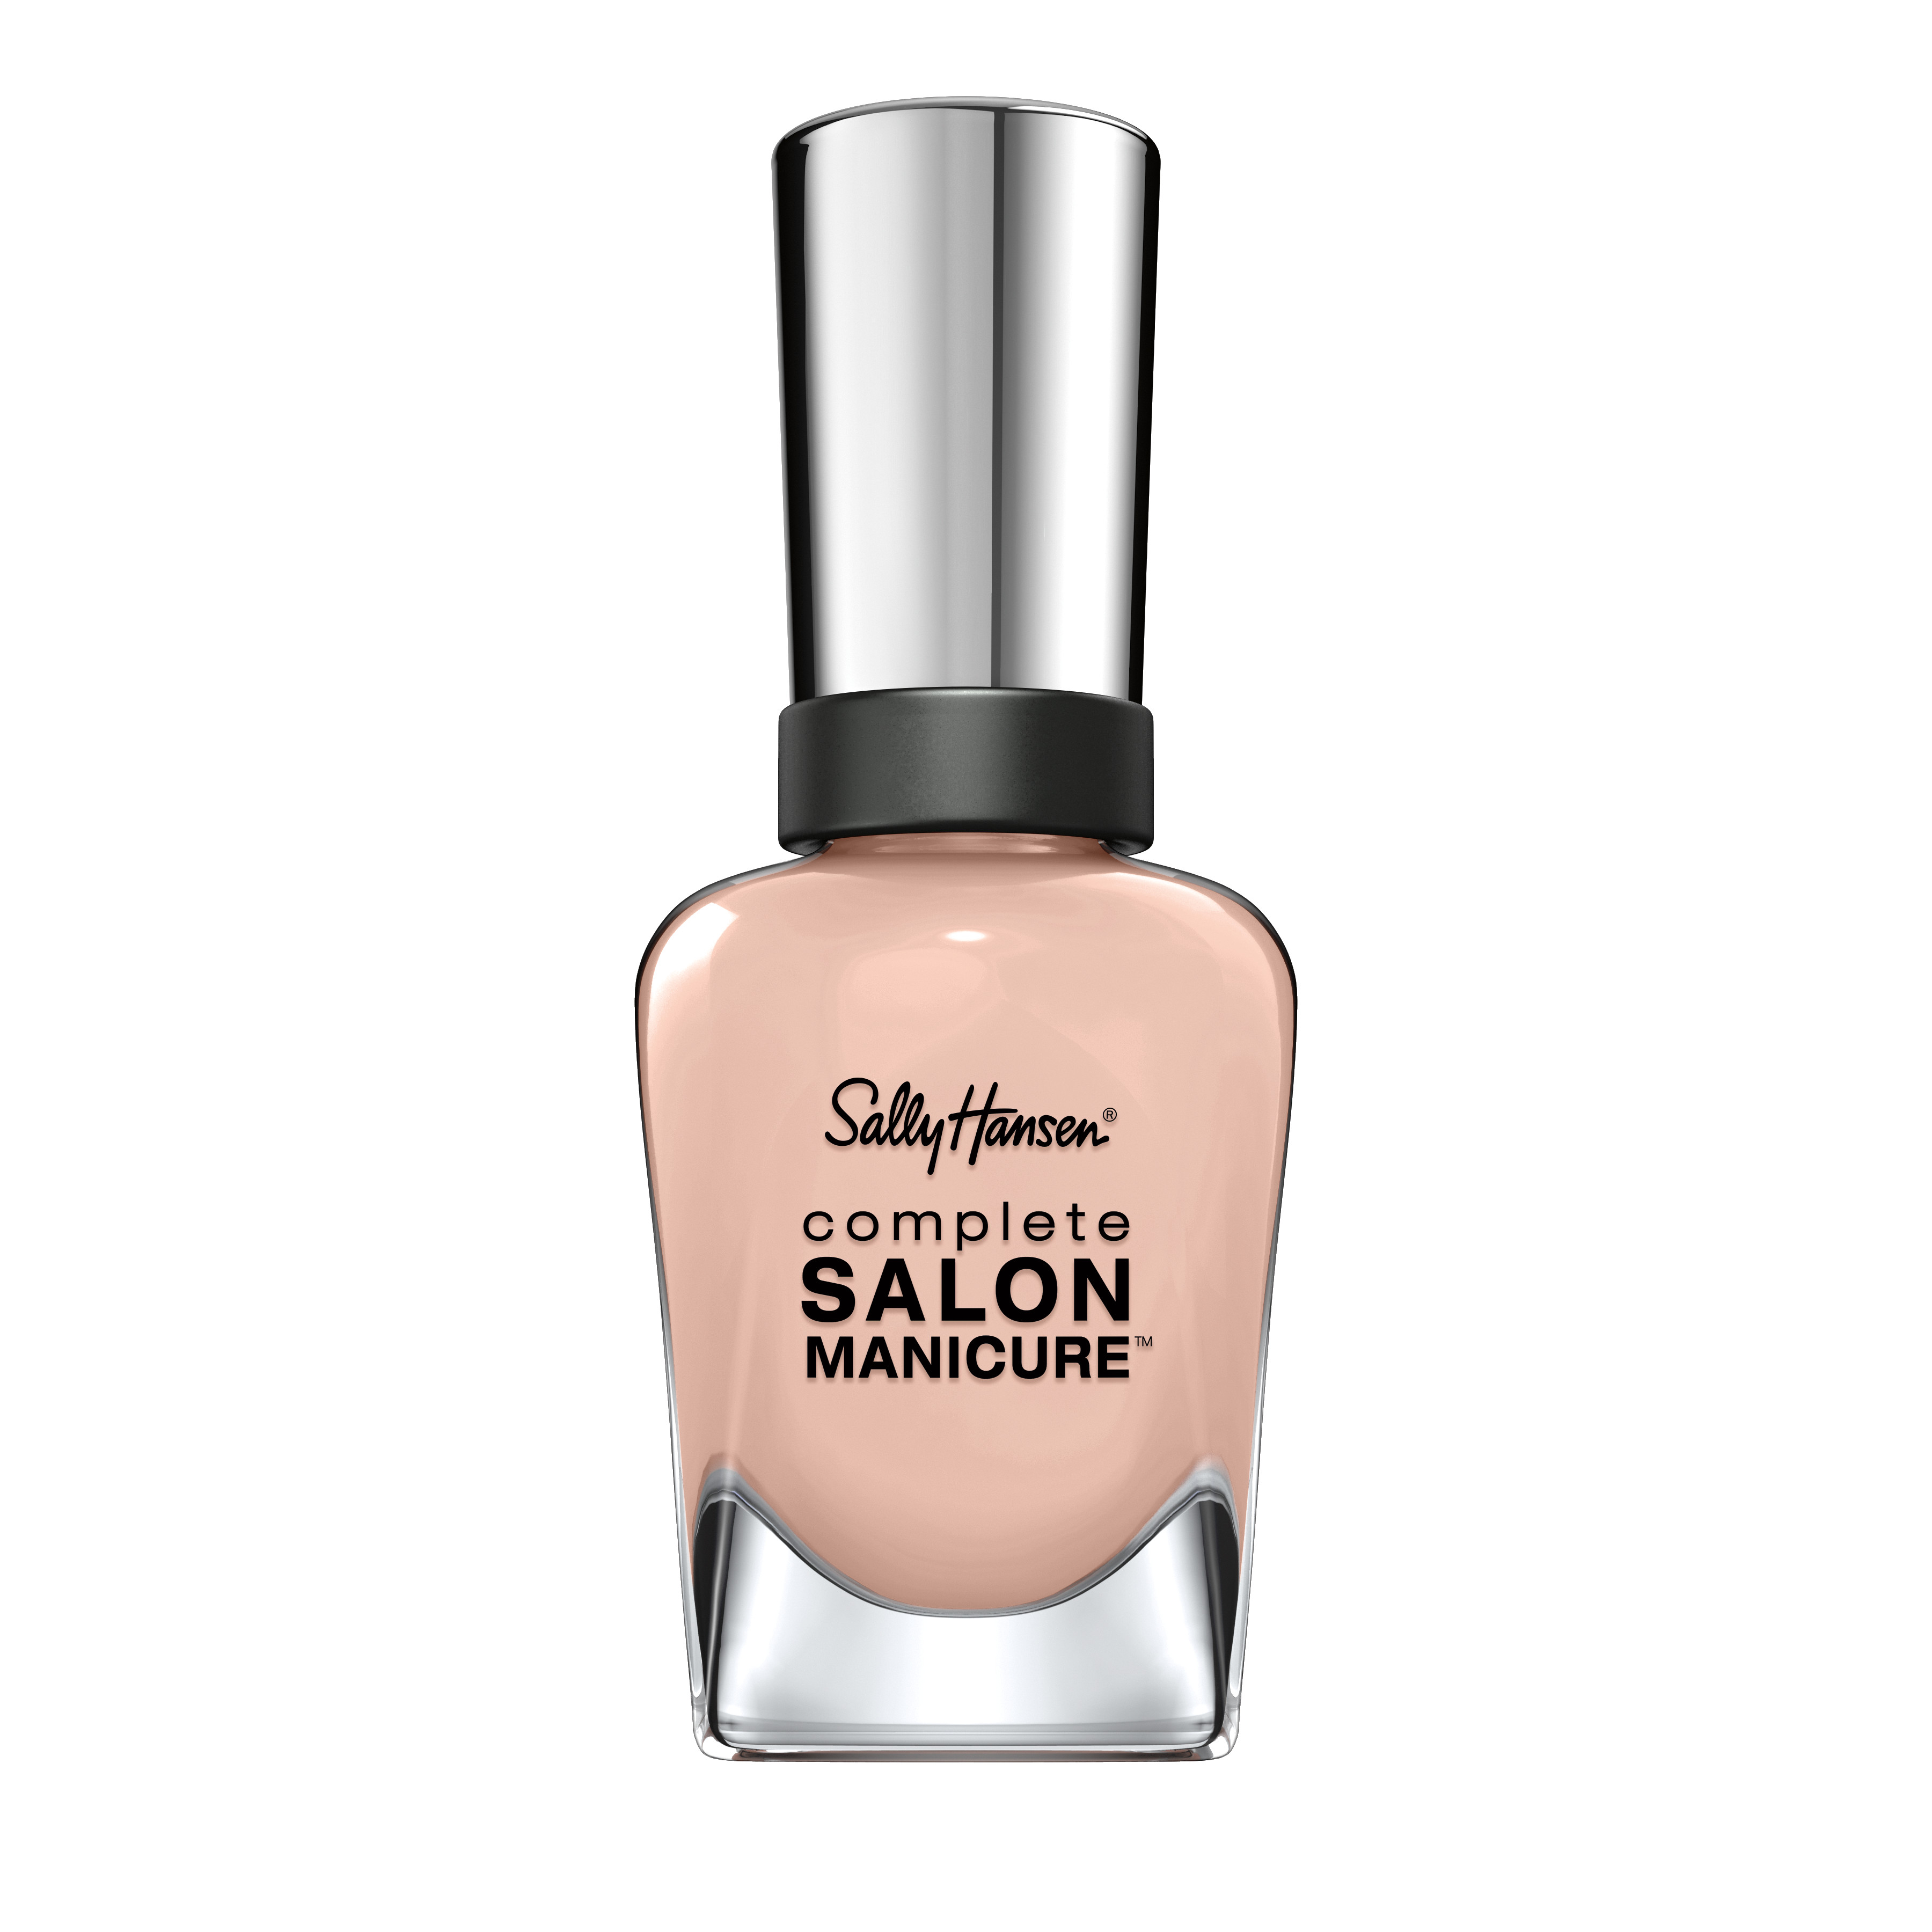 Sally Hansen Complete Salon Manicure Nail Color, Off-the-Shoulder - image 1 of 2